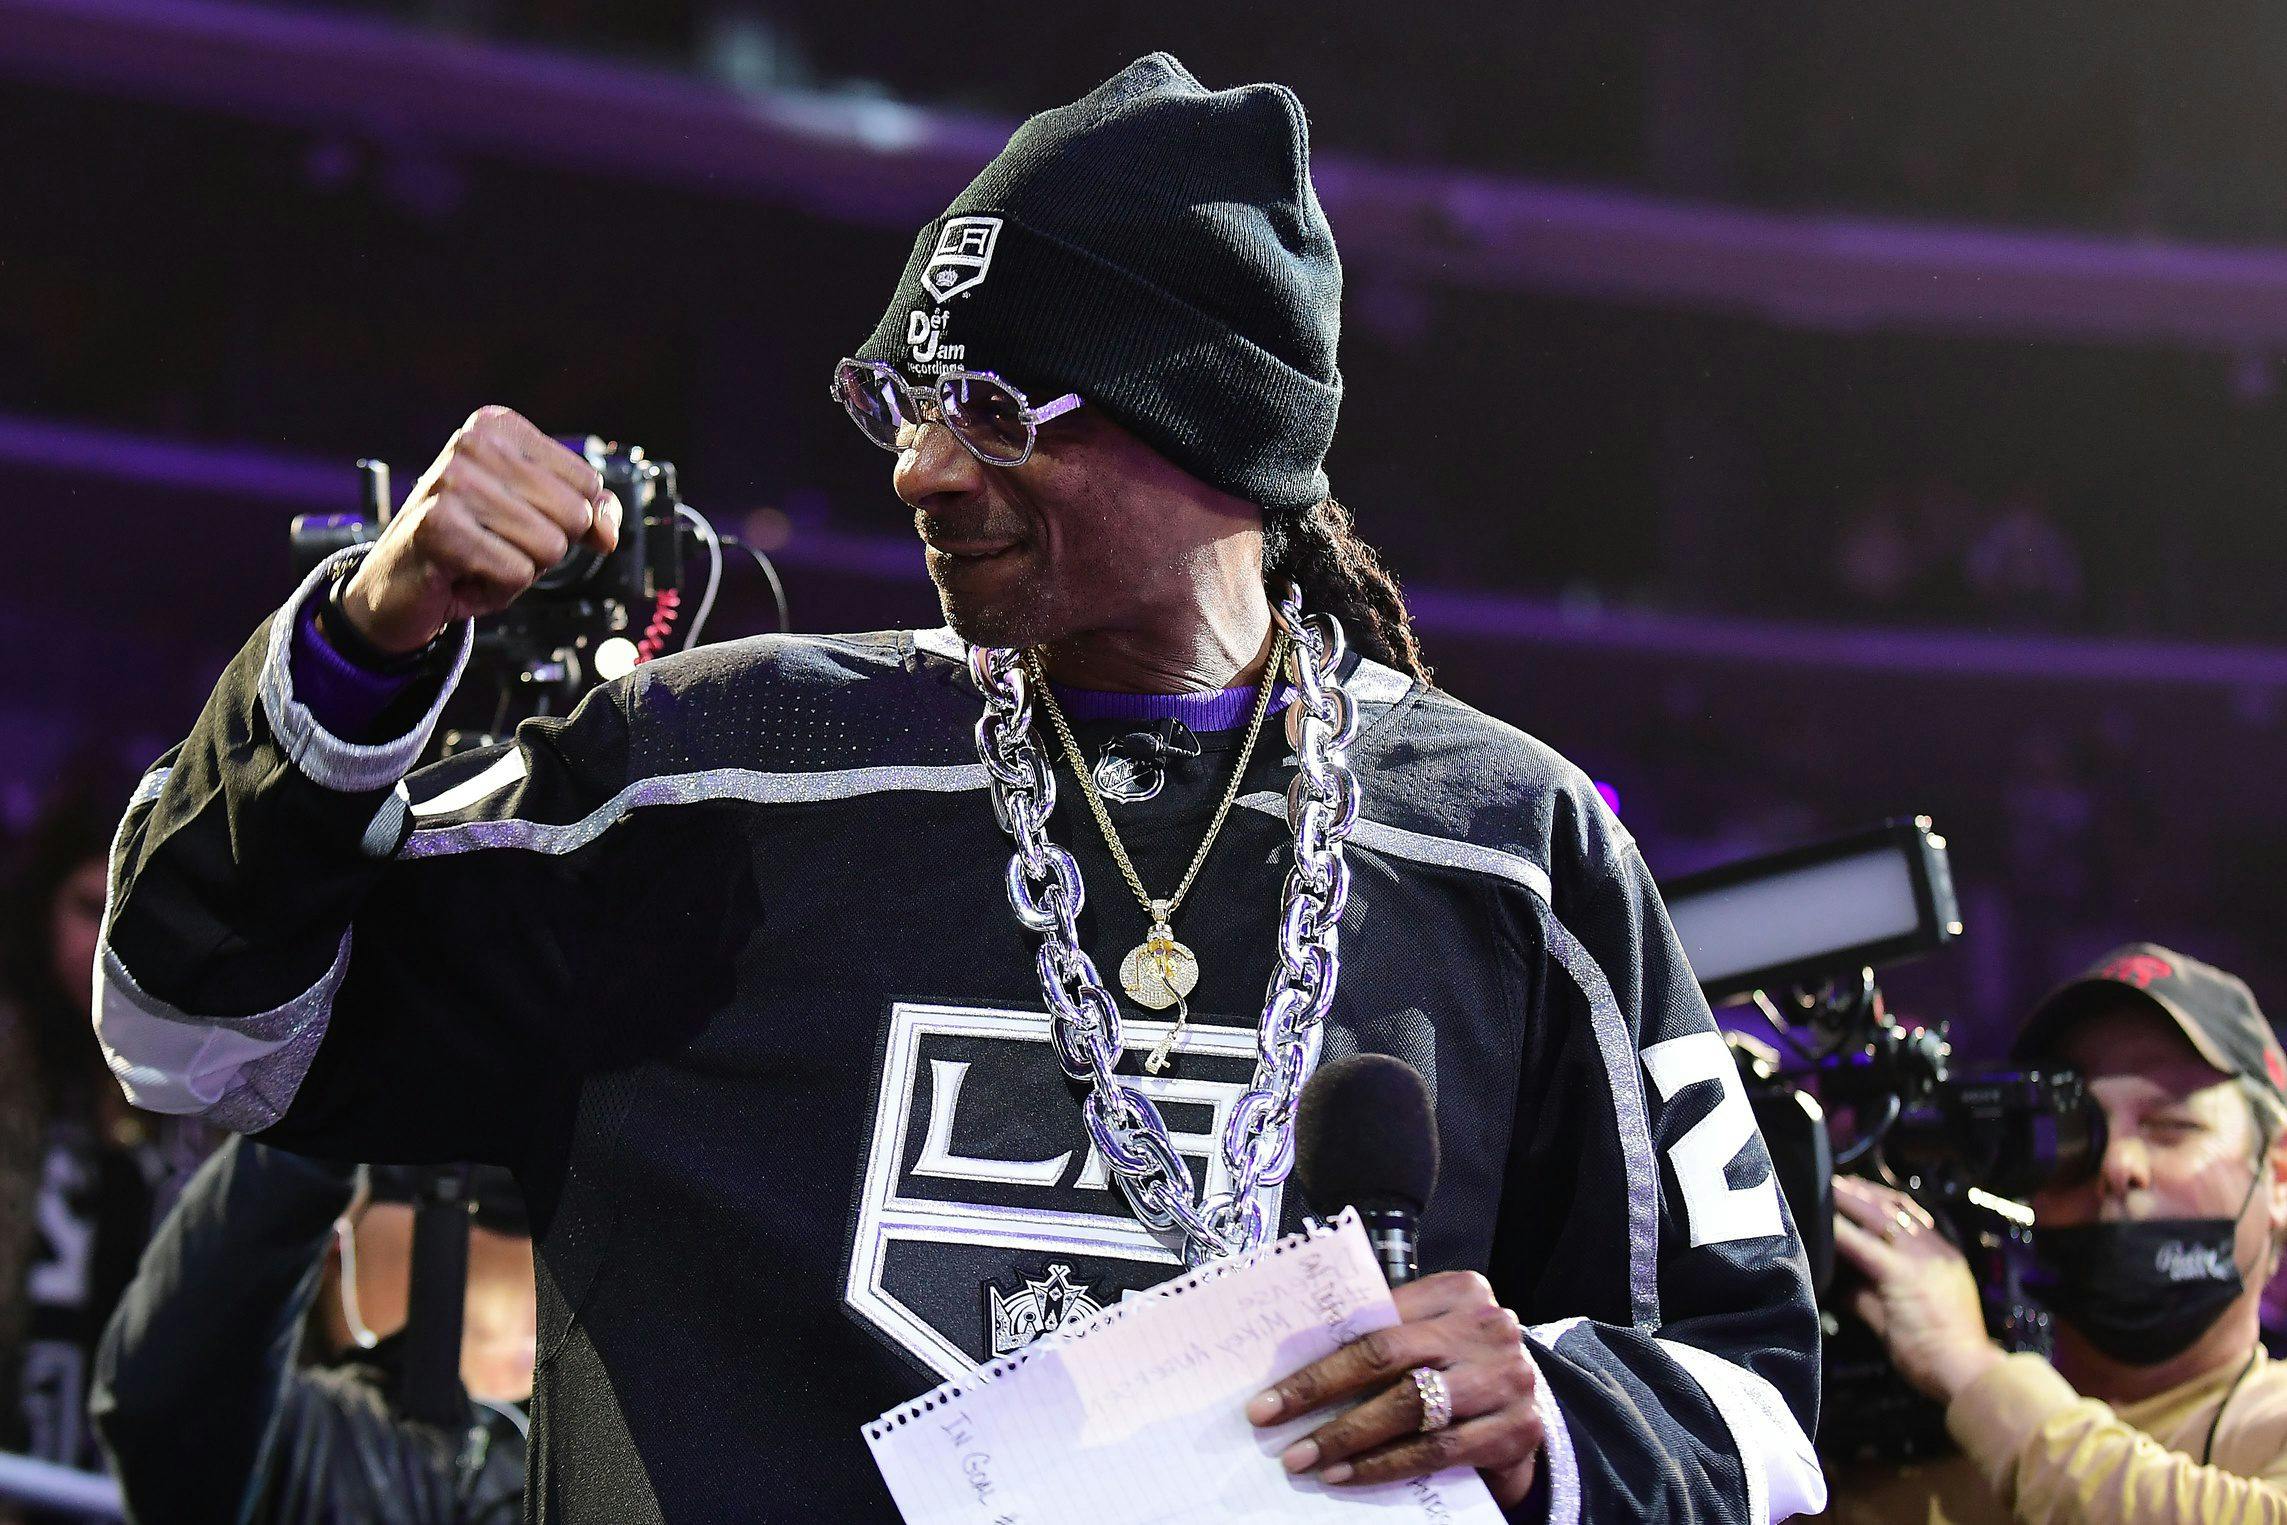 How Snoop Dogg Changed the Game - The Hockey News